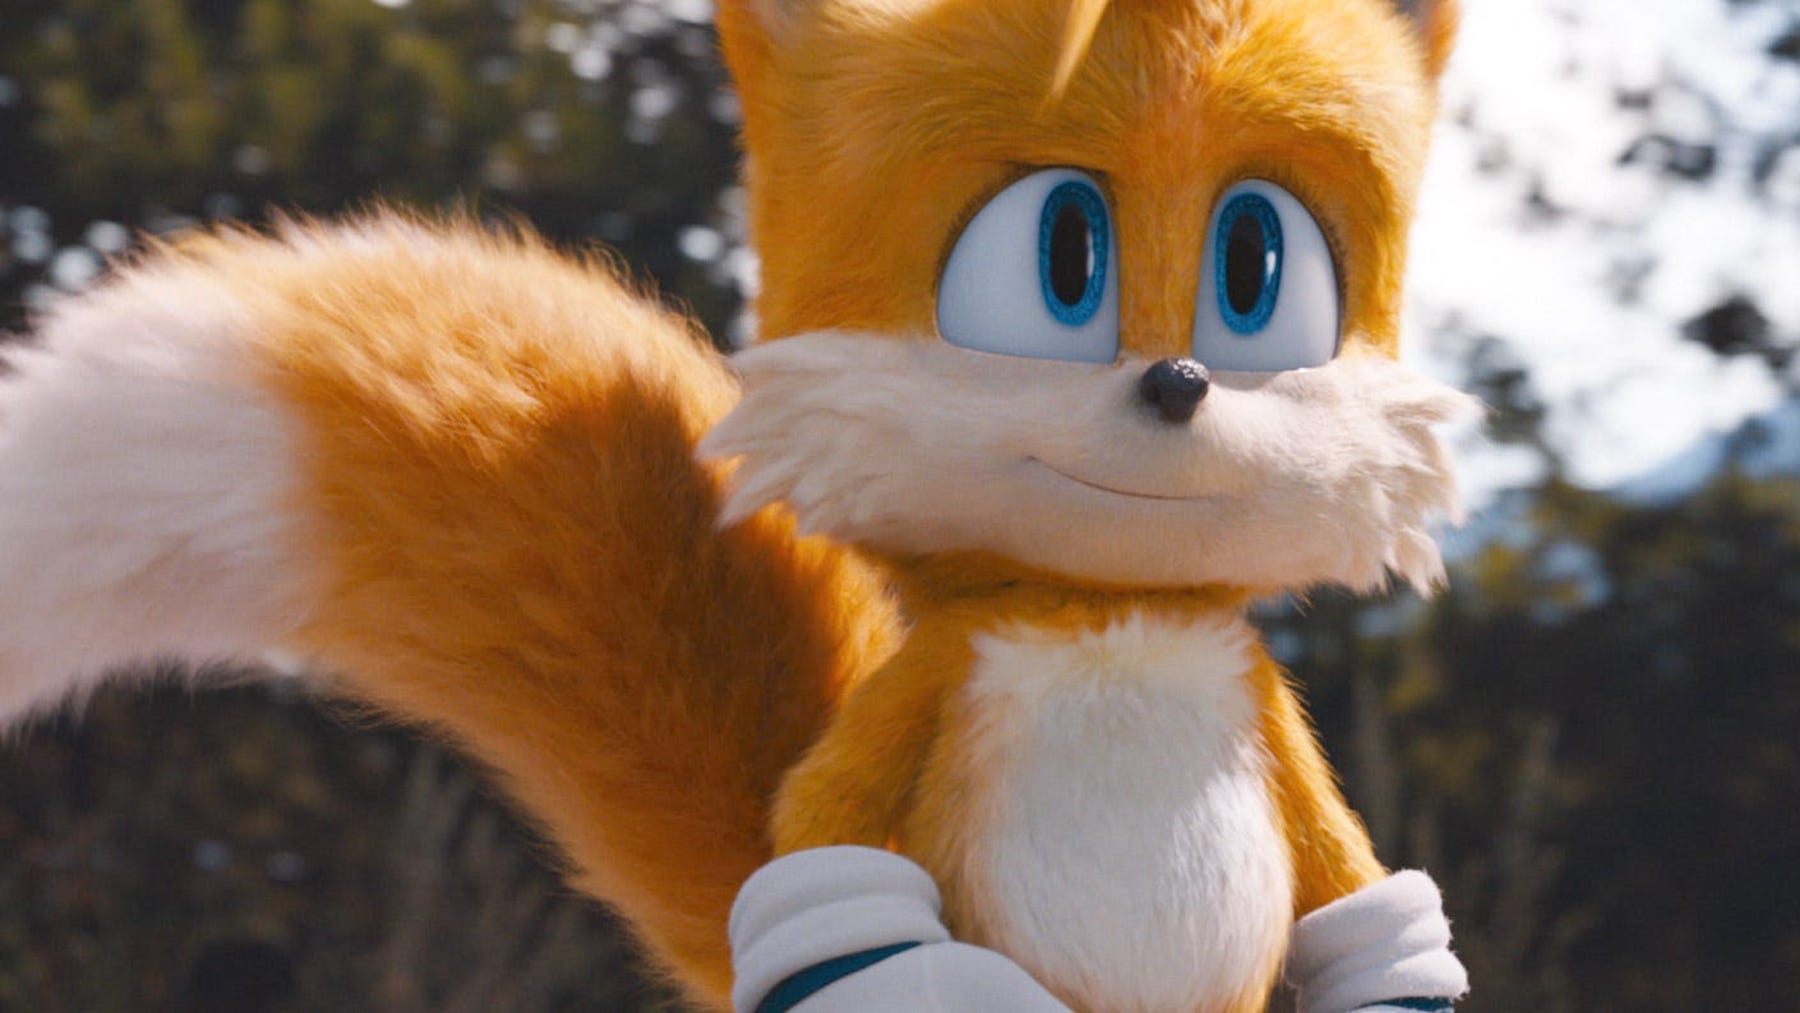 Tails, from the post-credits stinger from the live-action Sonic the Hedgehog movie